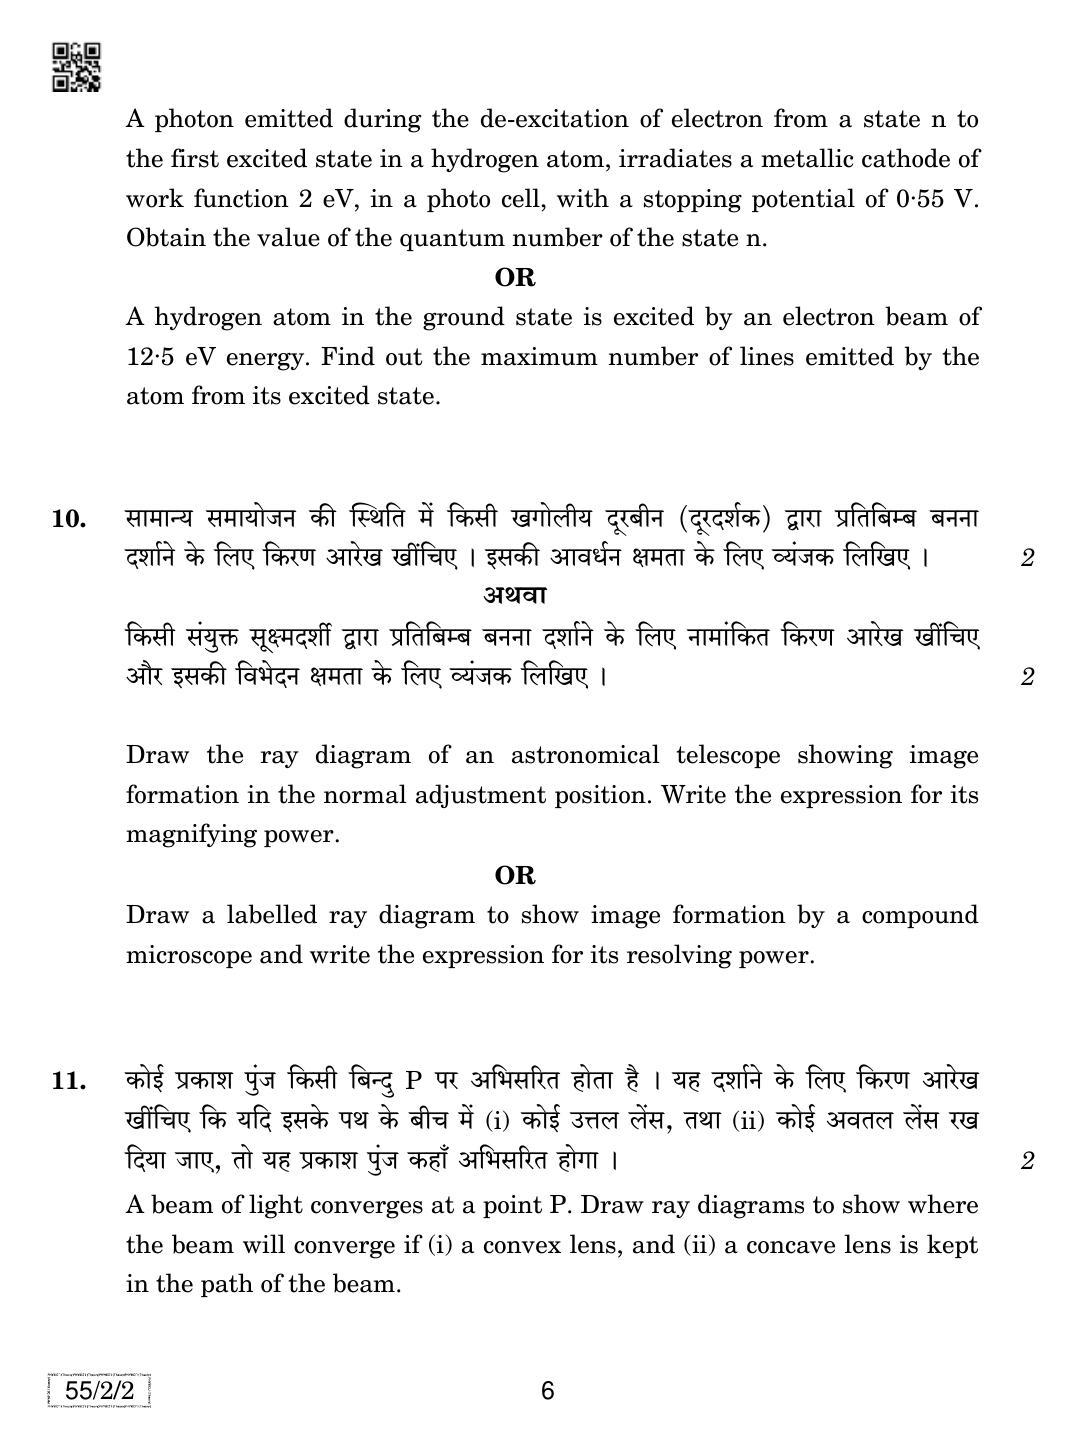 CBSE Class 12 55-2-2 Physics 2019 Question Paper - Page 6